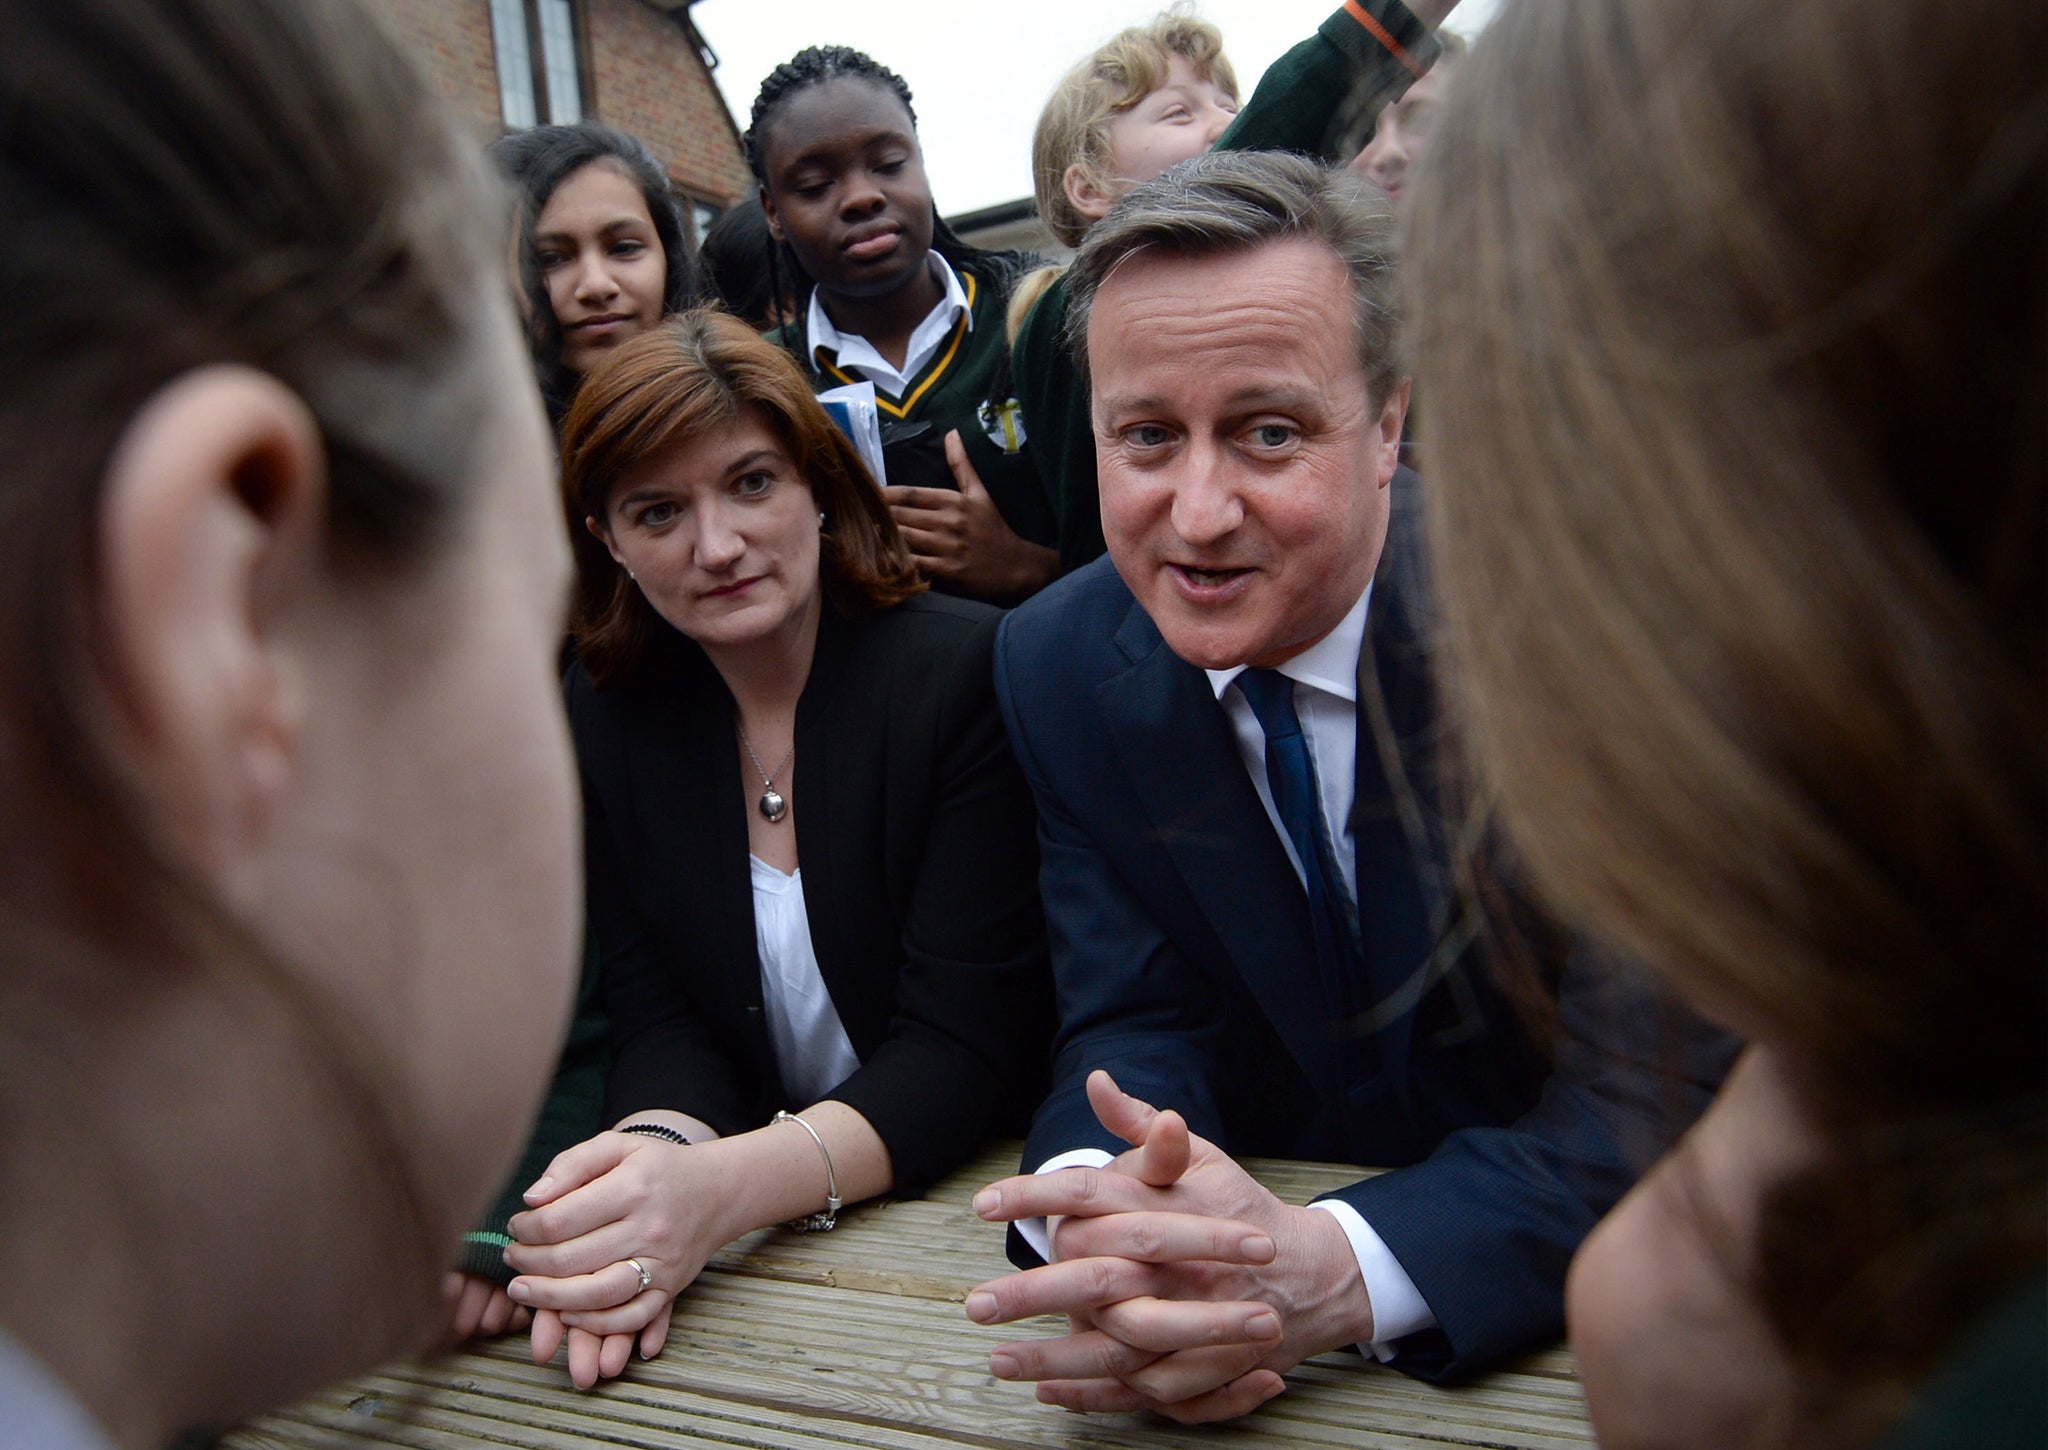 David Cameron and education secretary Nicky Morgan meet pupils during a visit to the Green School For Girls on March 9, 2015 in London